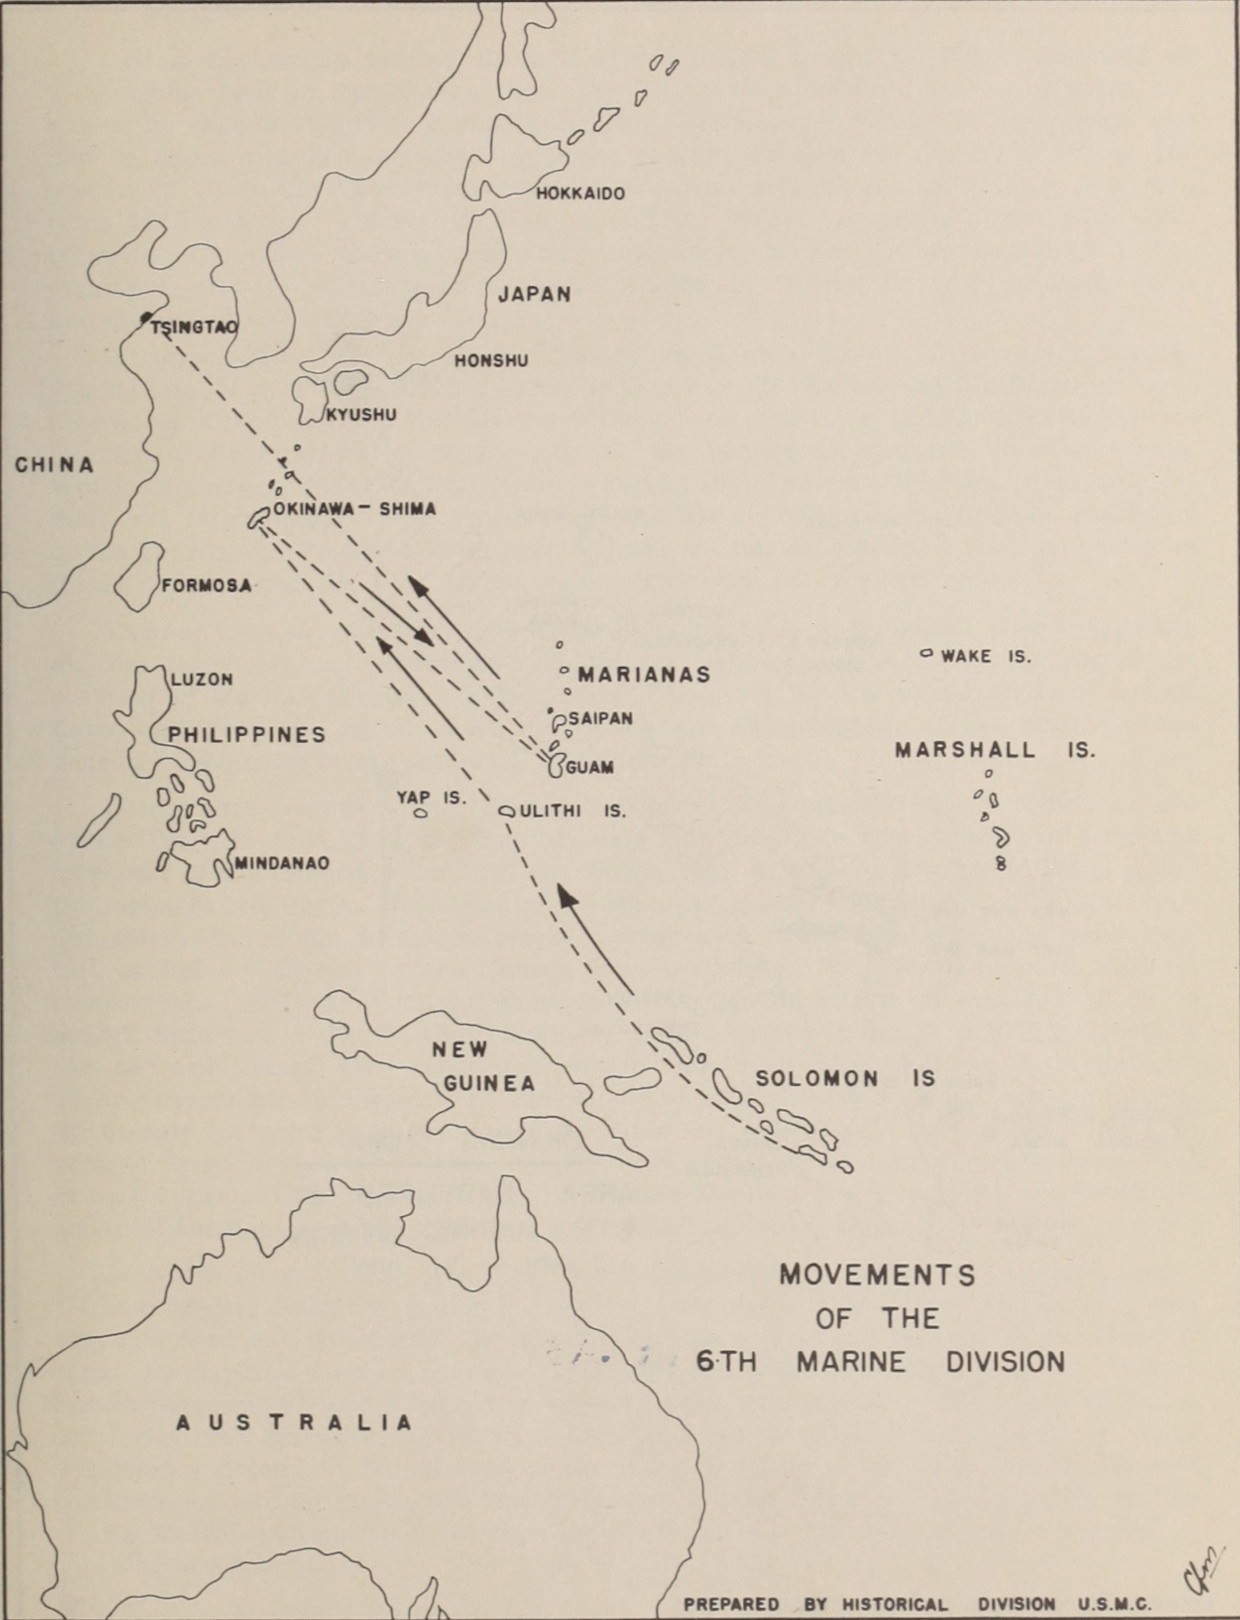 Map 1. Movements of the 6th Marine Division.